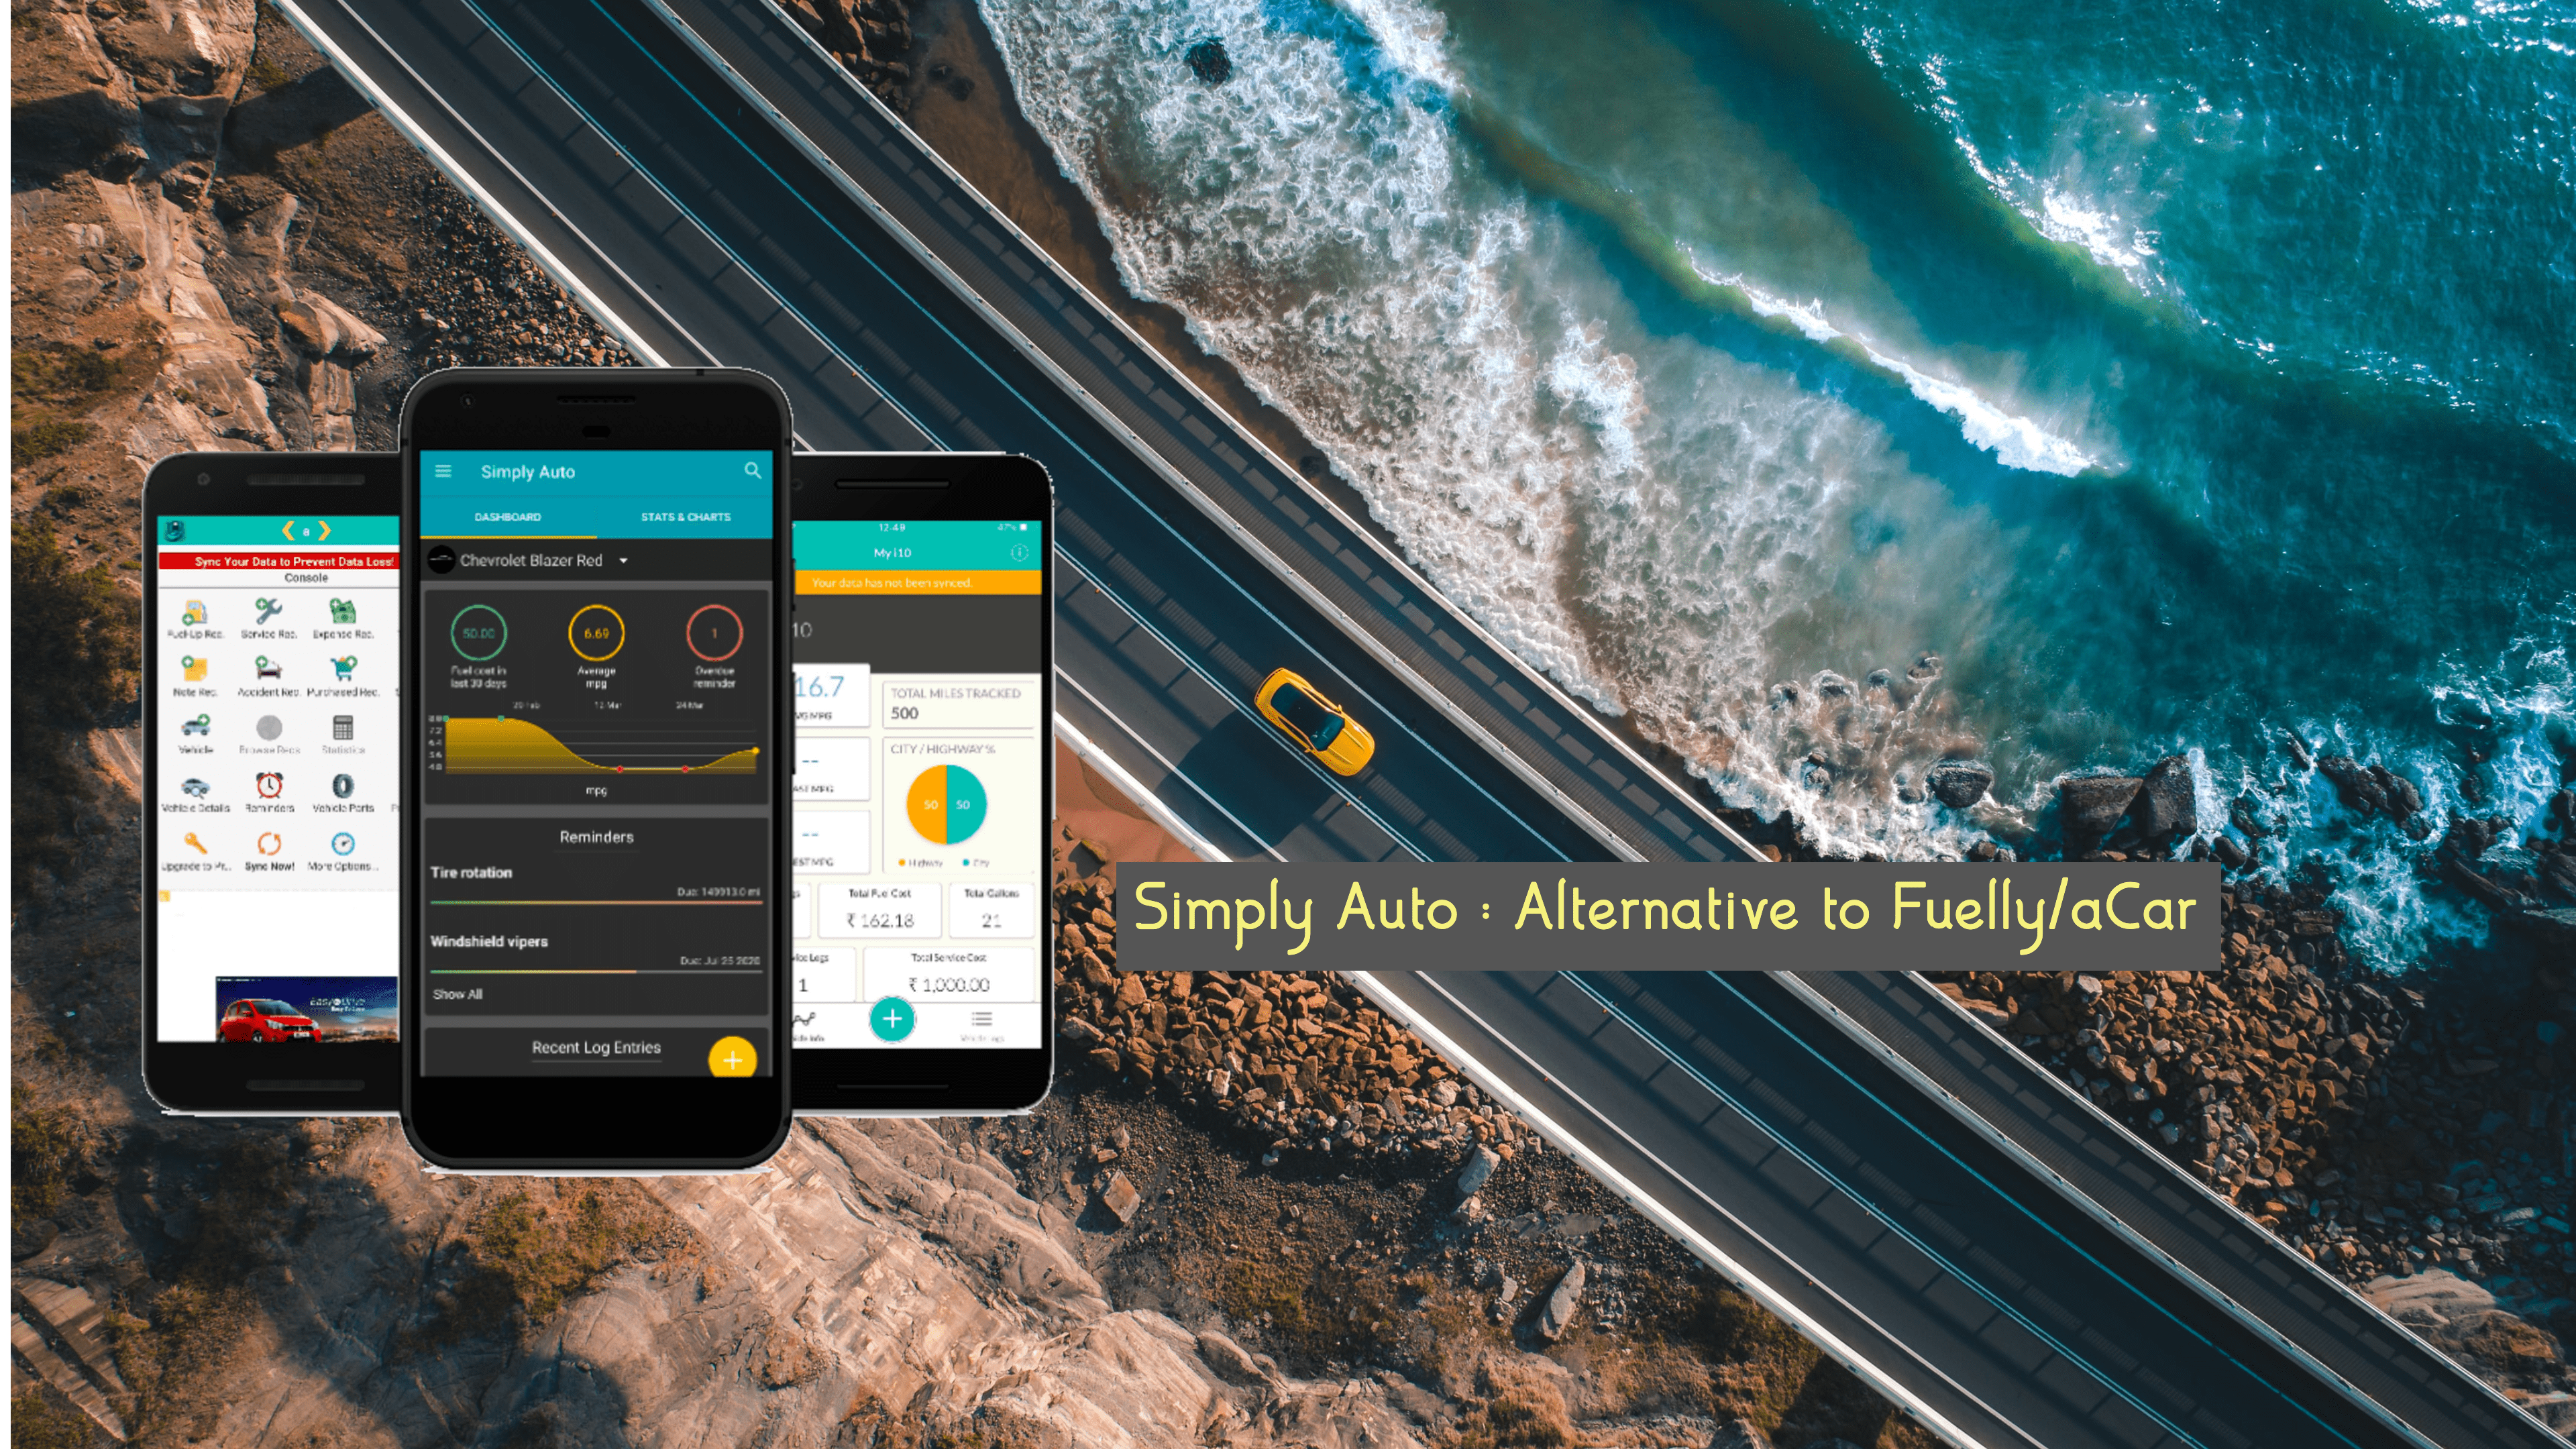 fuely alternative, simply auto fuelly alternative, best app for car management